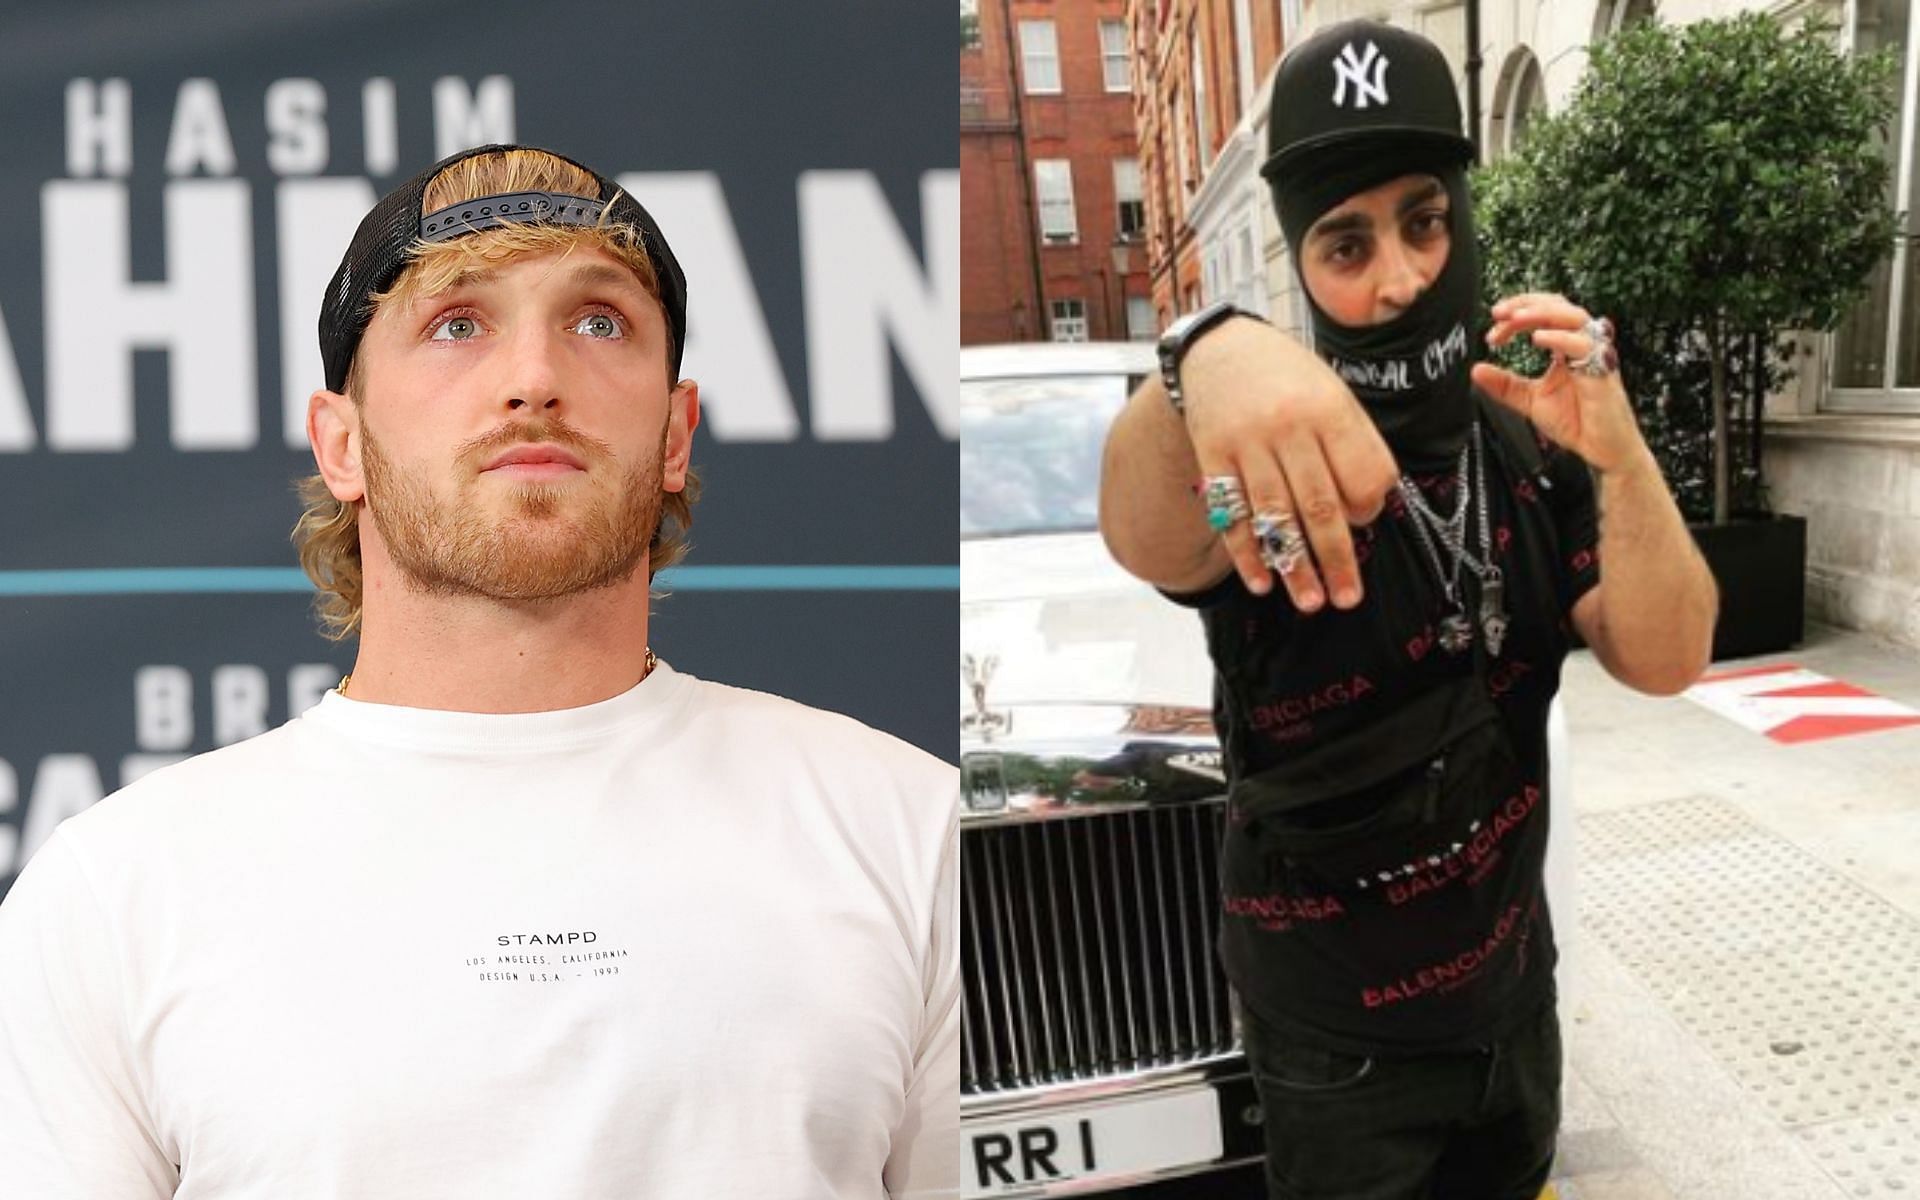 Logan Paul (left) and Mo Deen (right) (Image credits Getty Images and @mo.deen_ on Instagram)